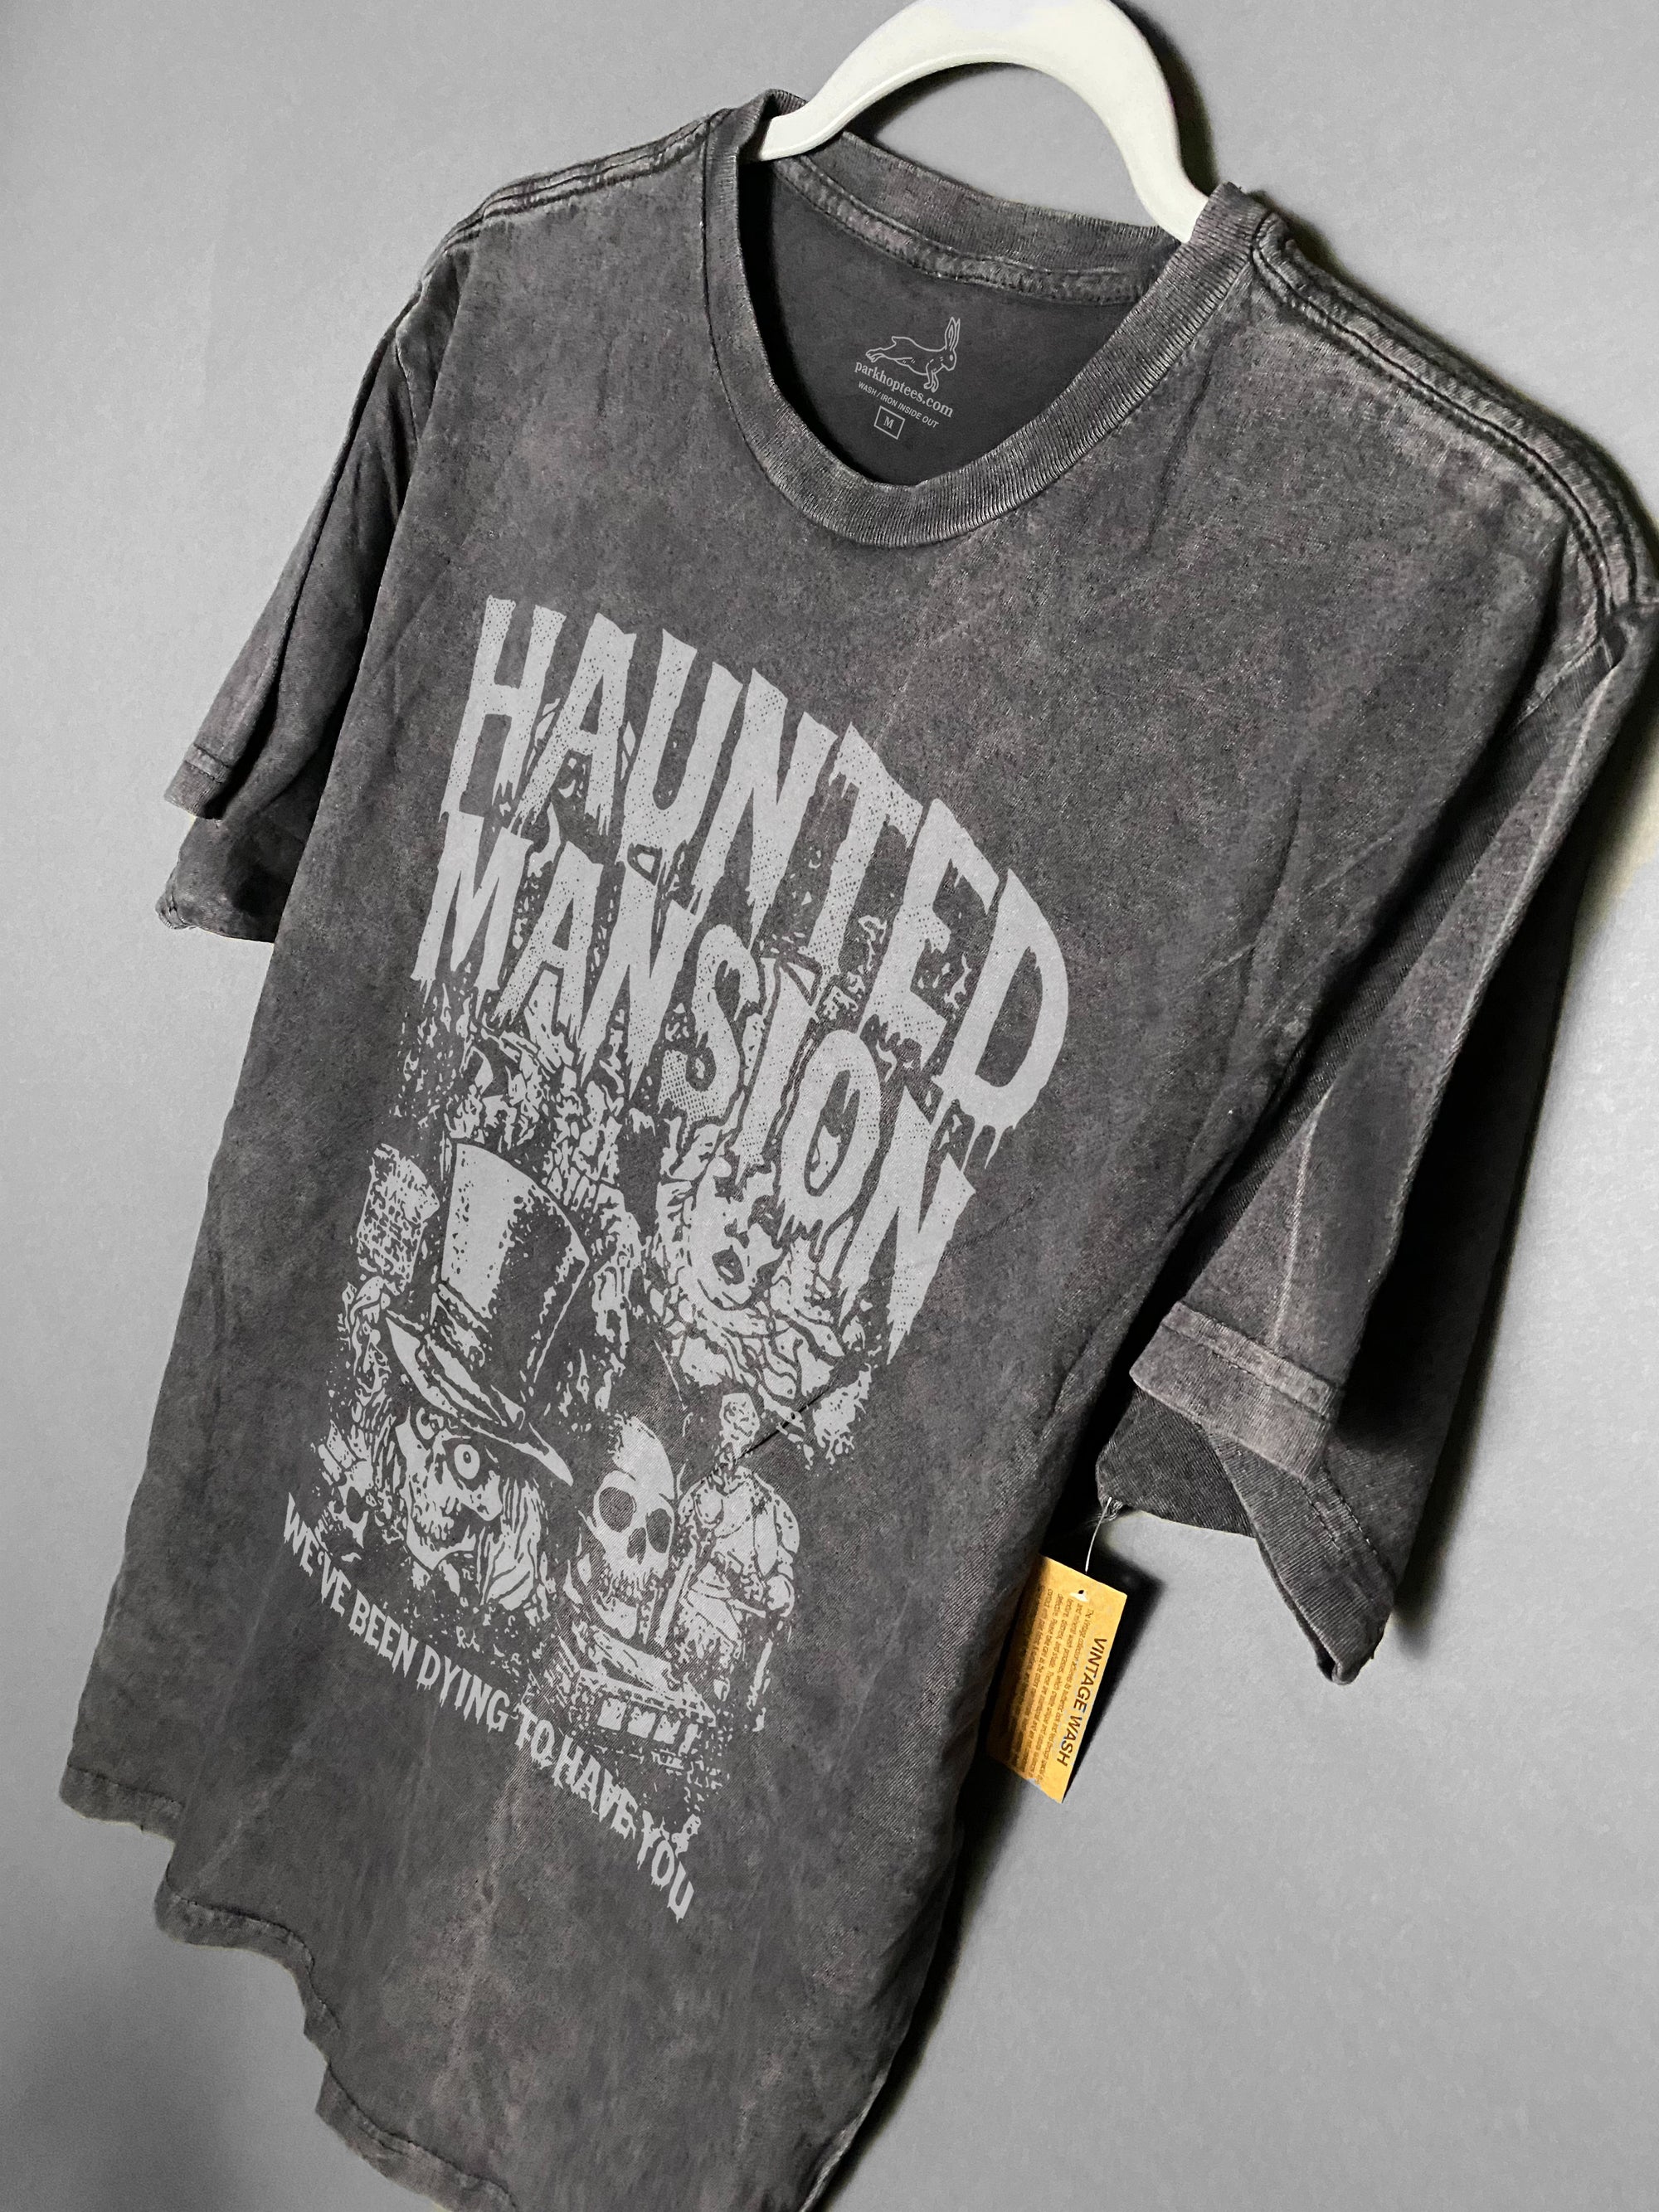 We designed this one of a kind tee Haunted Mansion tee only available at Park Hop Tees. This is made with the hatbox ghost, and madame leotta. We&#39;ve been dying to have you